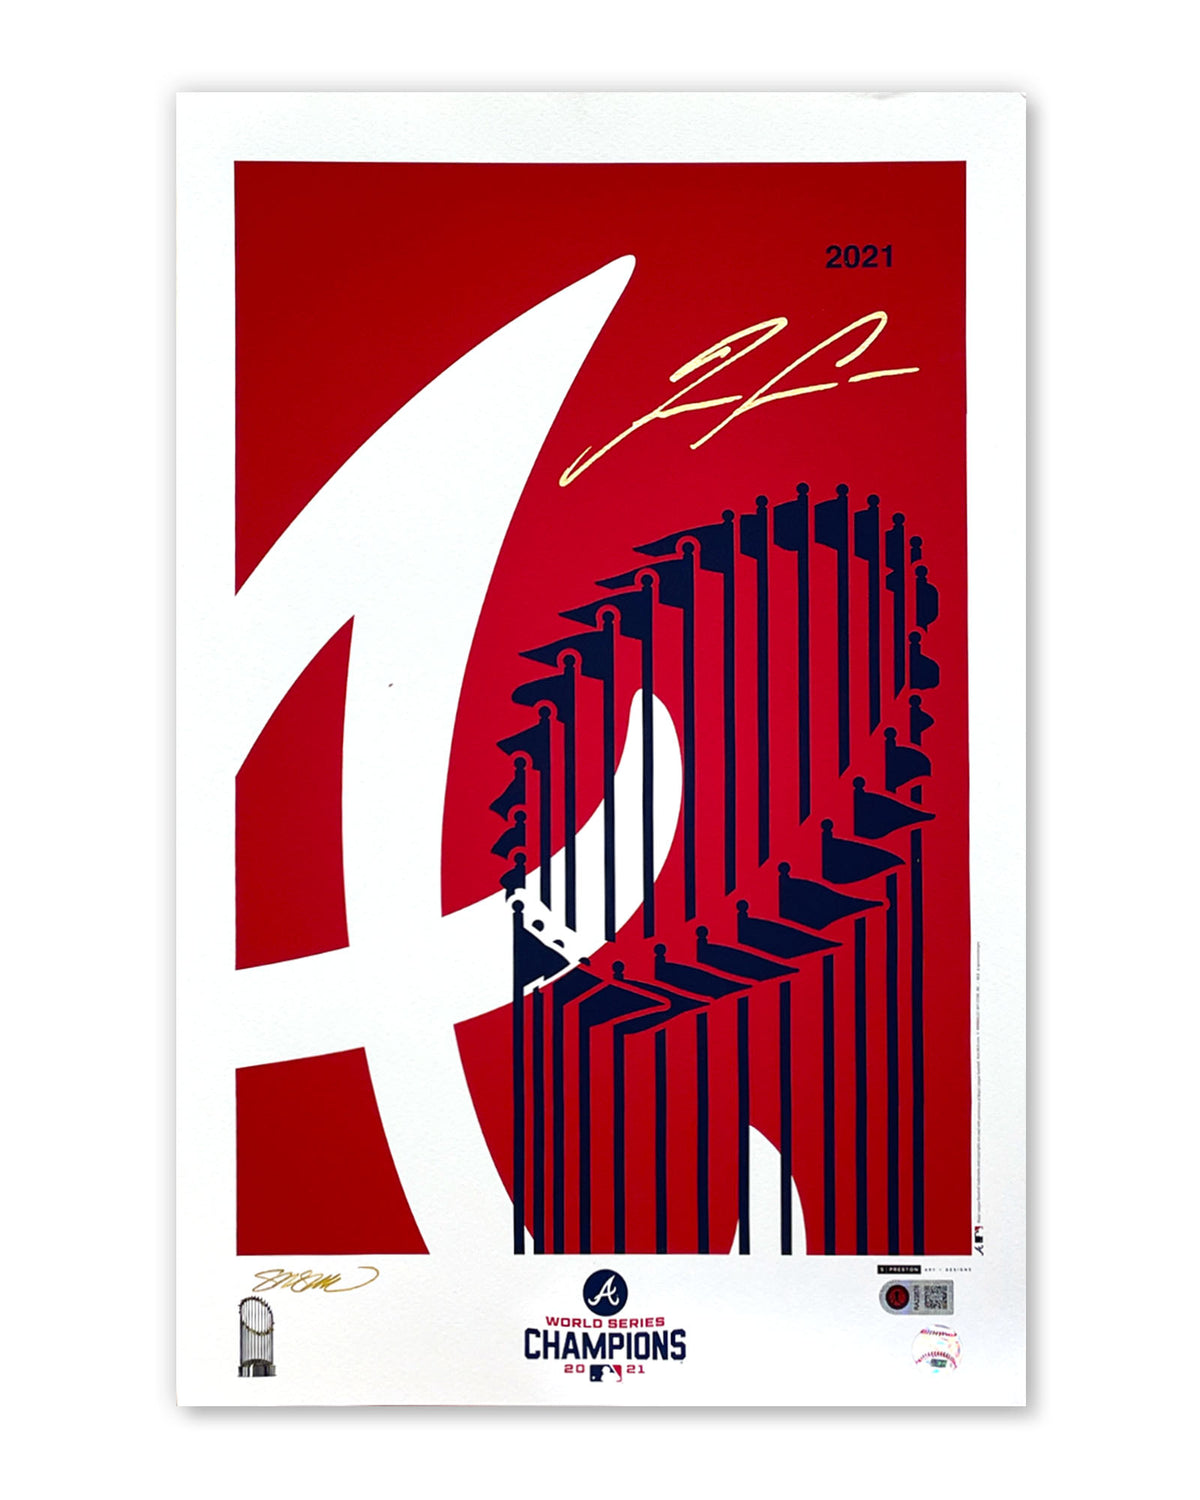 Minimalist World Series 2021 - Ronald Acuna Jr. Autographed - Poster Print - Authenticated